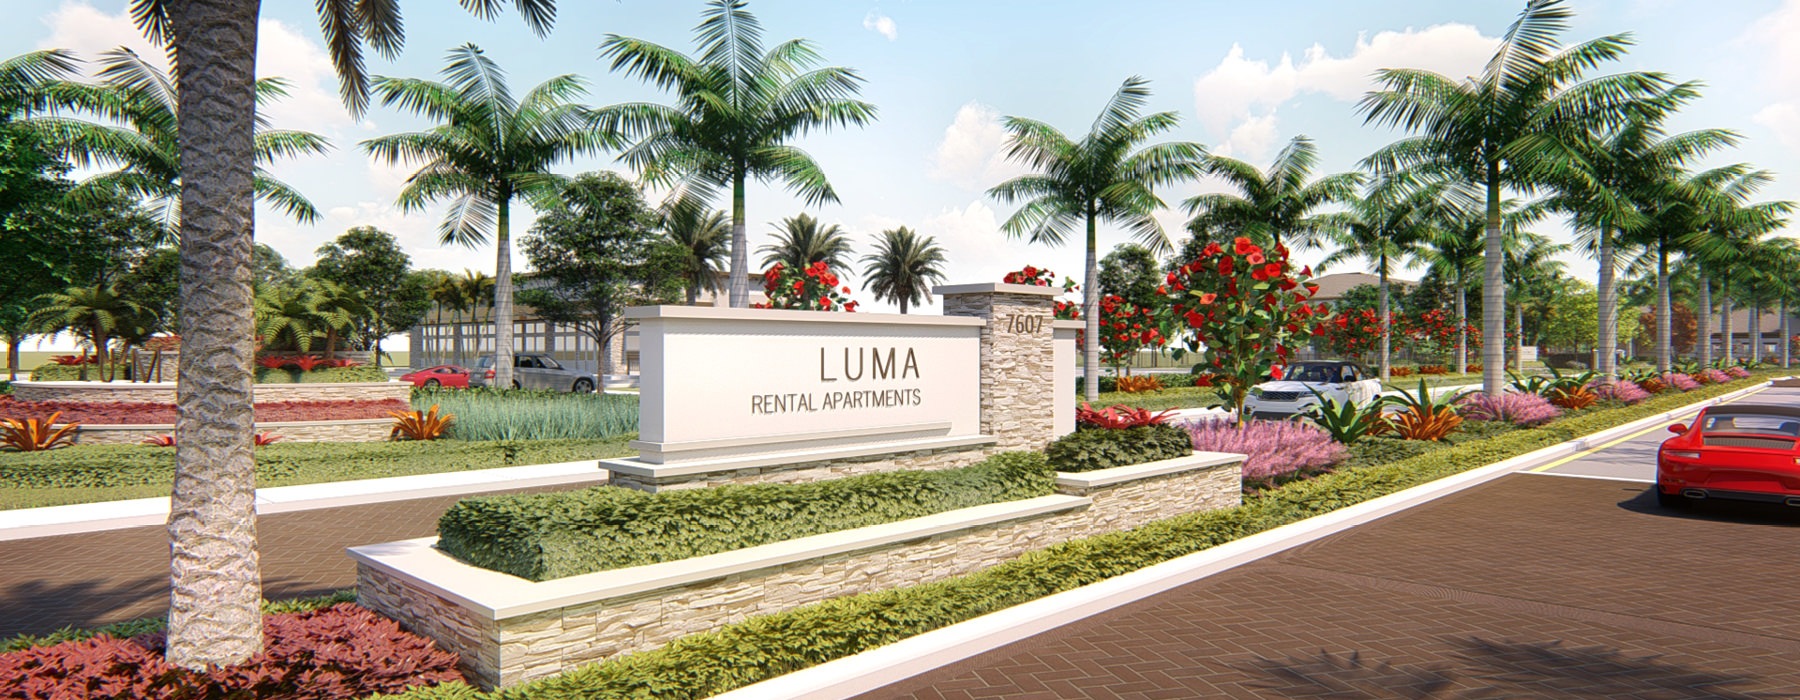 Well-maintained and landscaped LUMA entrance